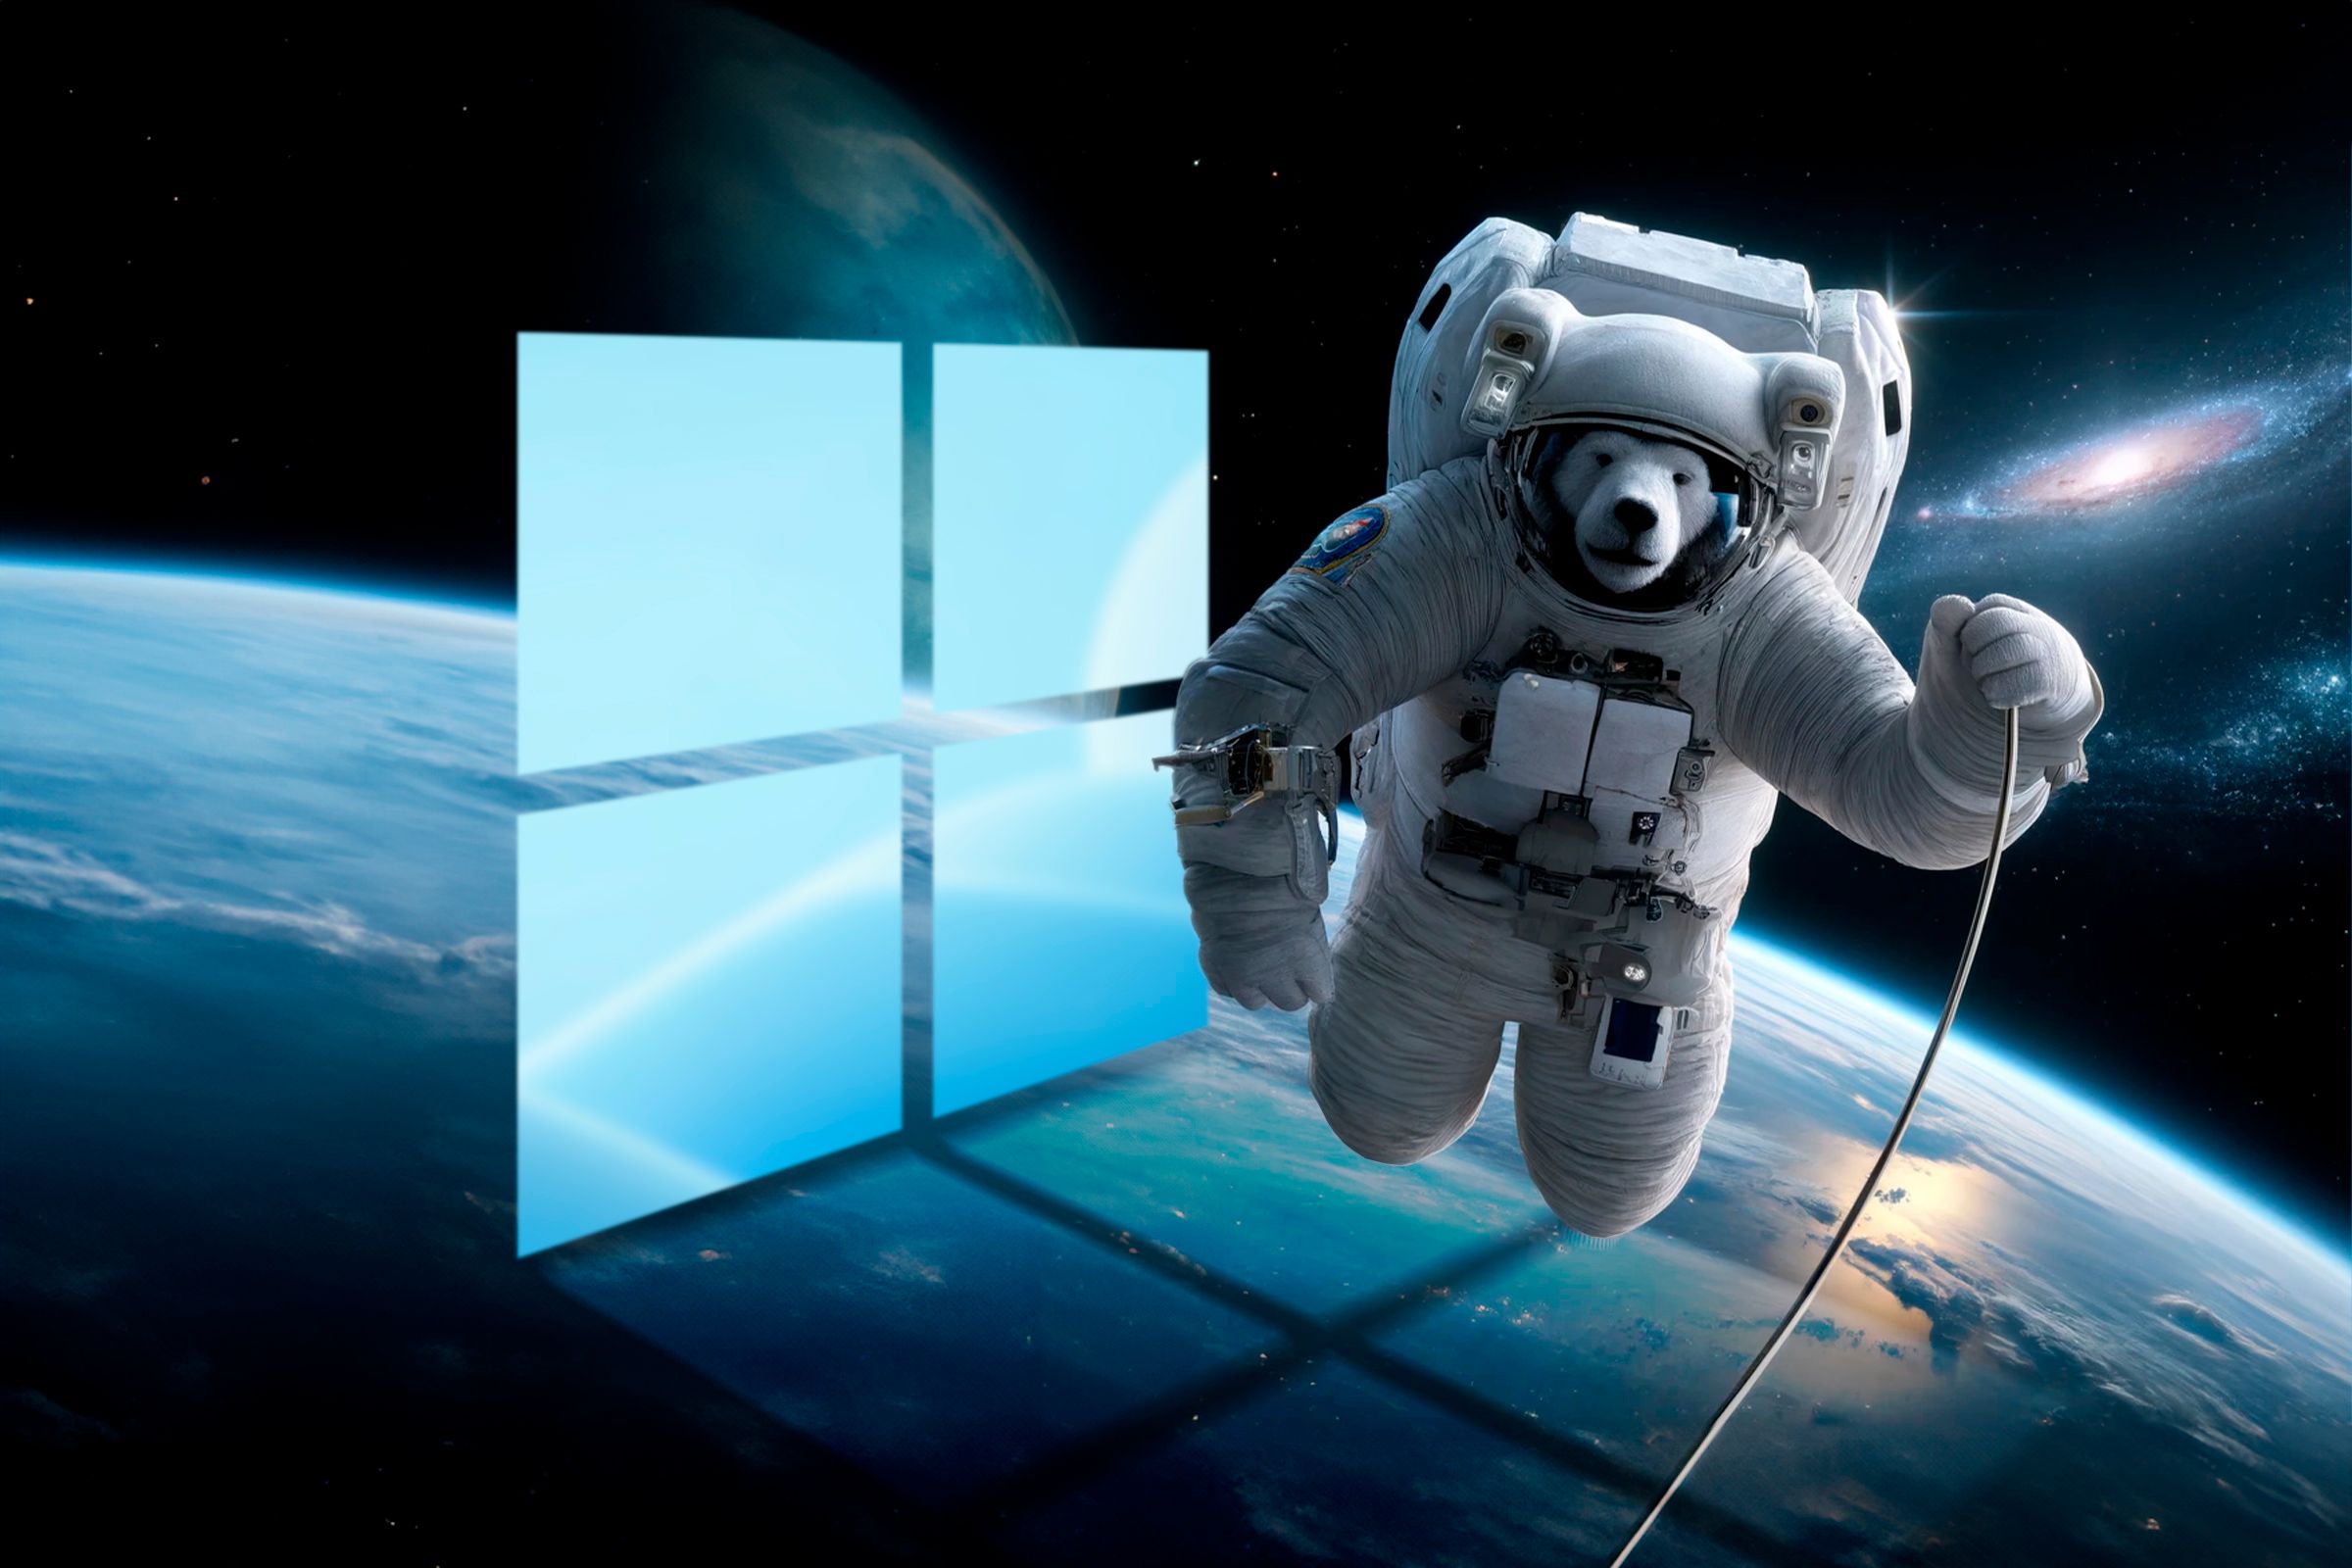 An image of an astronaut polar bear generated by artificial intelligence and the Windows logo.